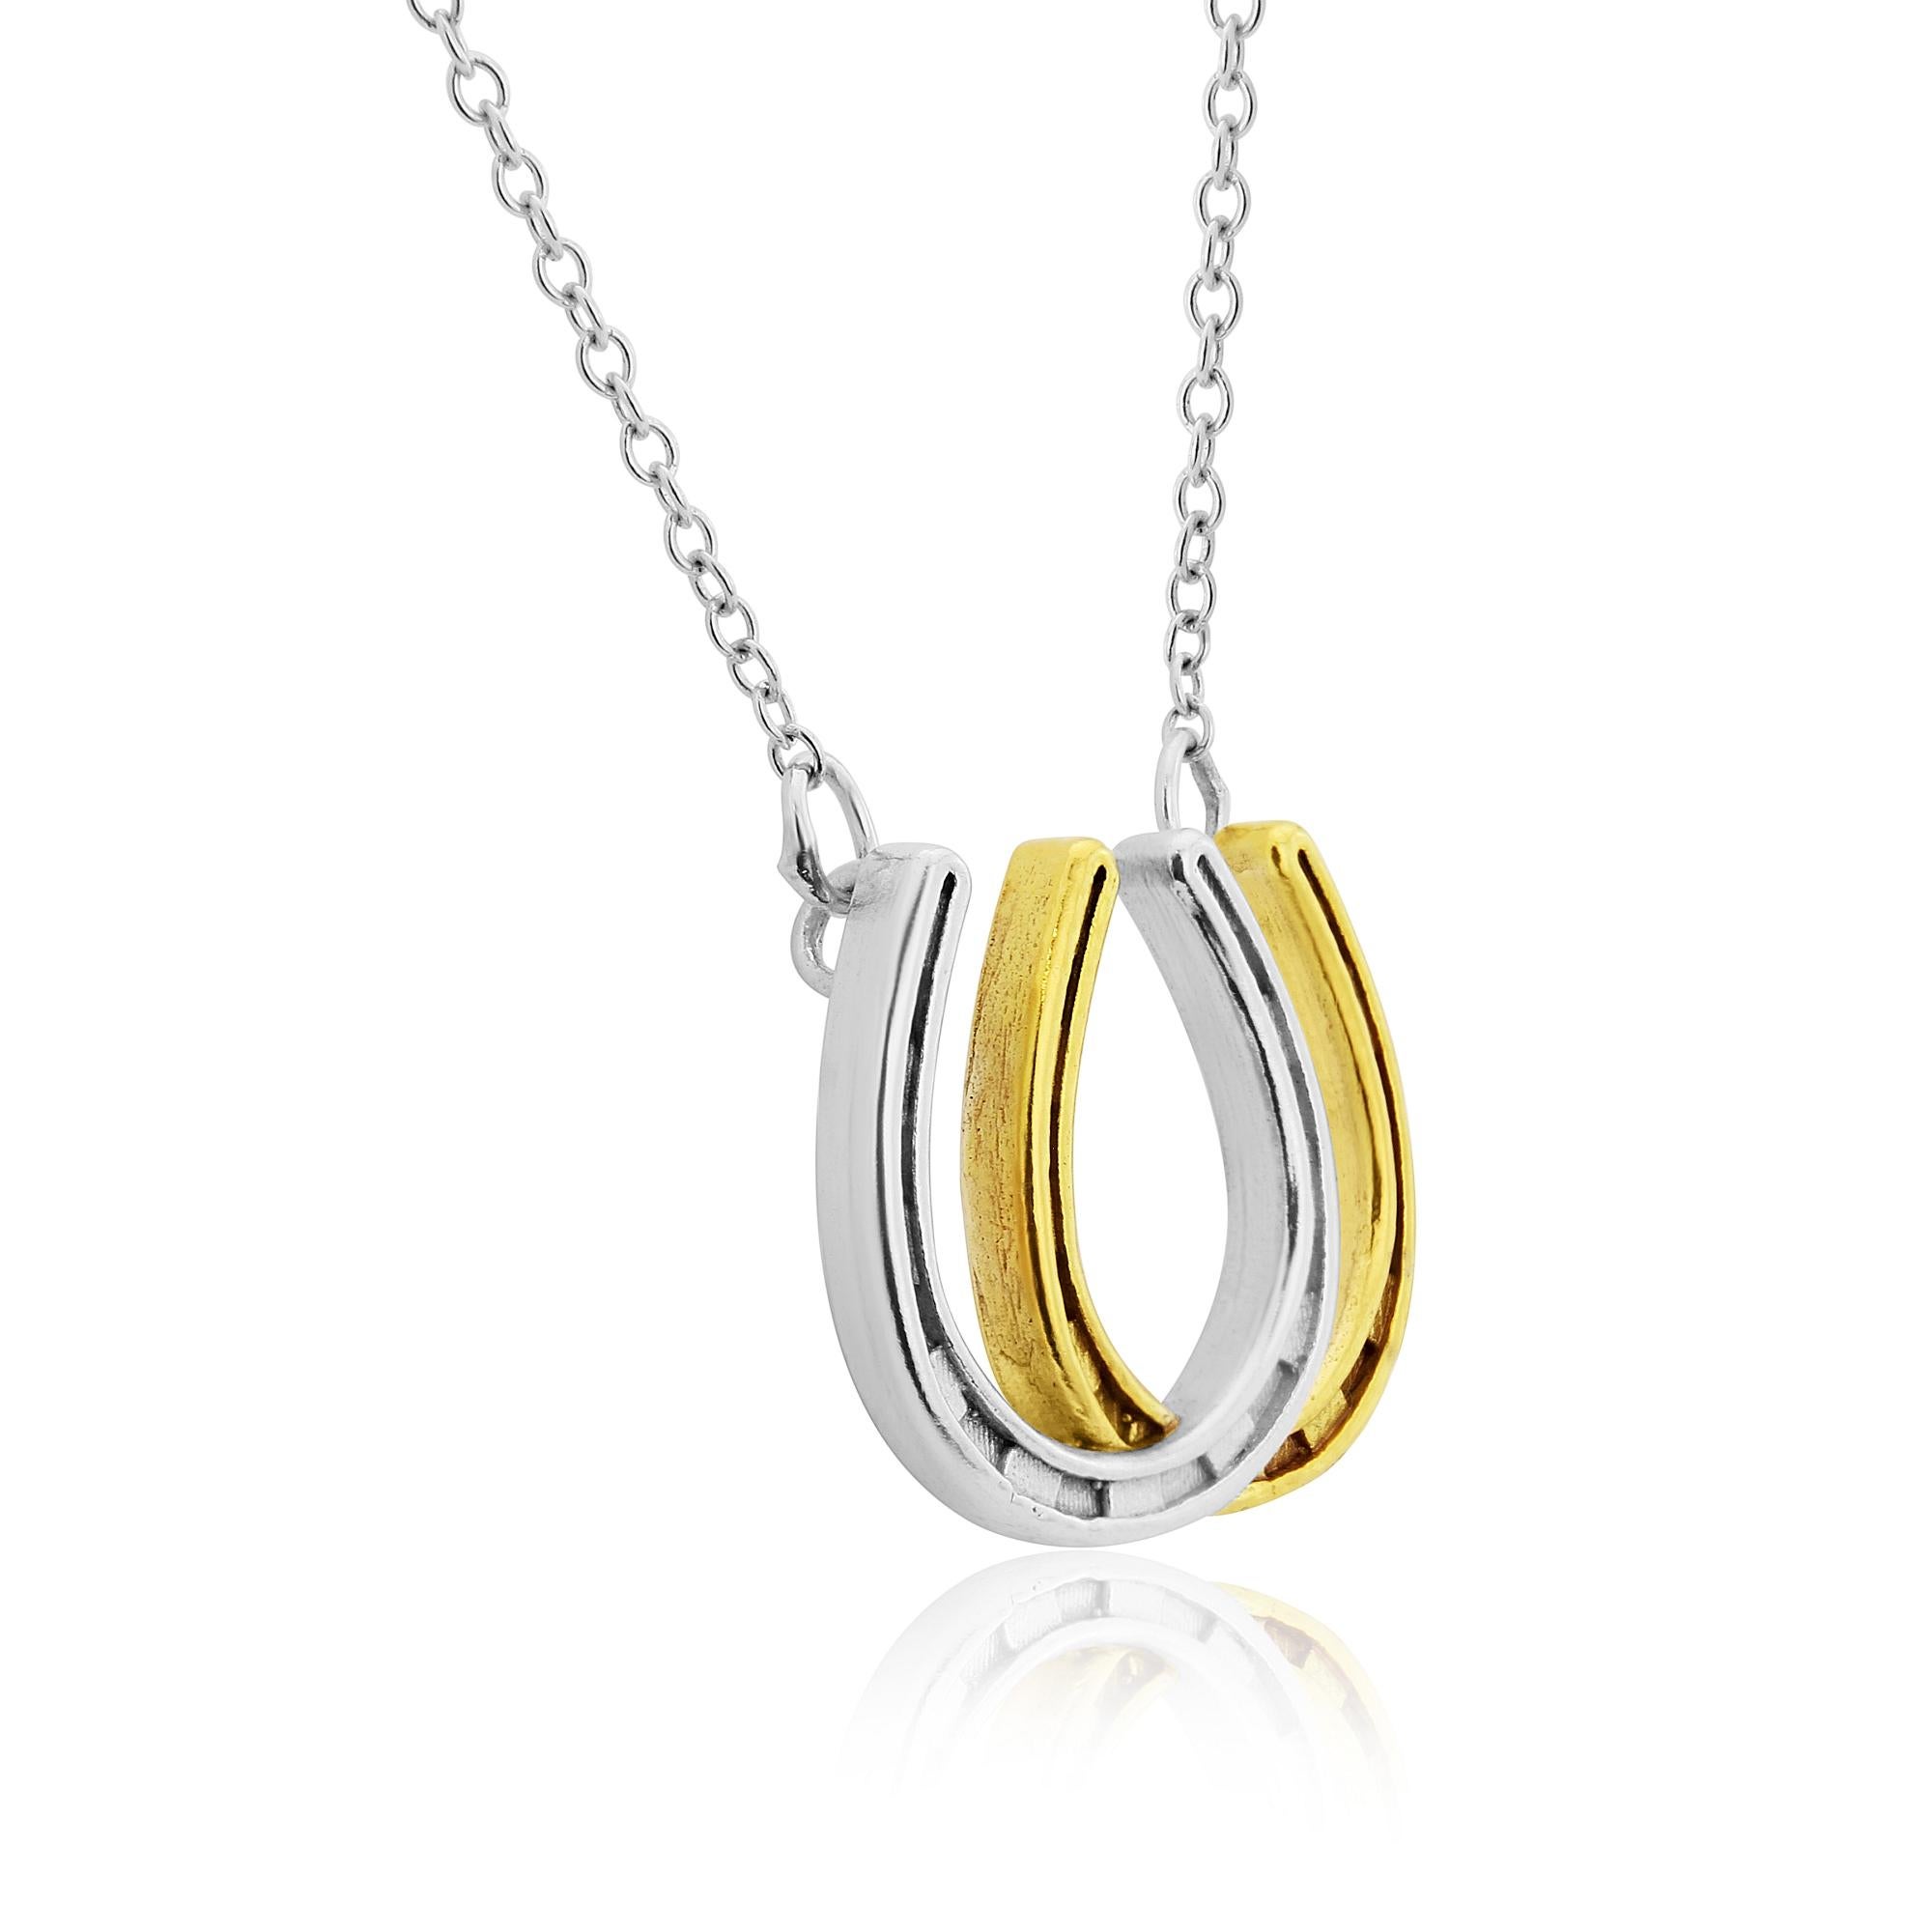 This is a design unique to Simon Kemp, a third generation English Jeweller.
He has captured the detail within the horseshoes and created a beautiful piece of jewellery by using 18K Gold vermeil on top of the solid sterling silver.
The chain is 18 